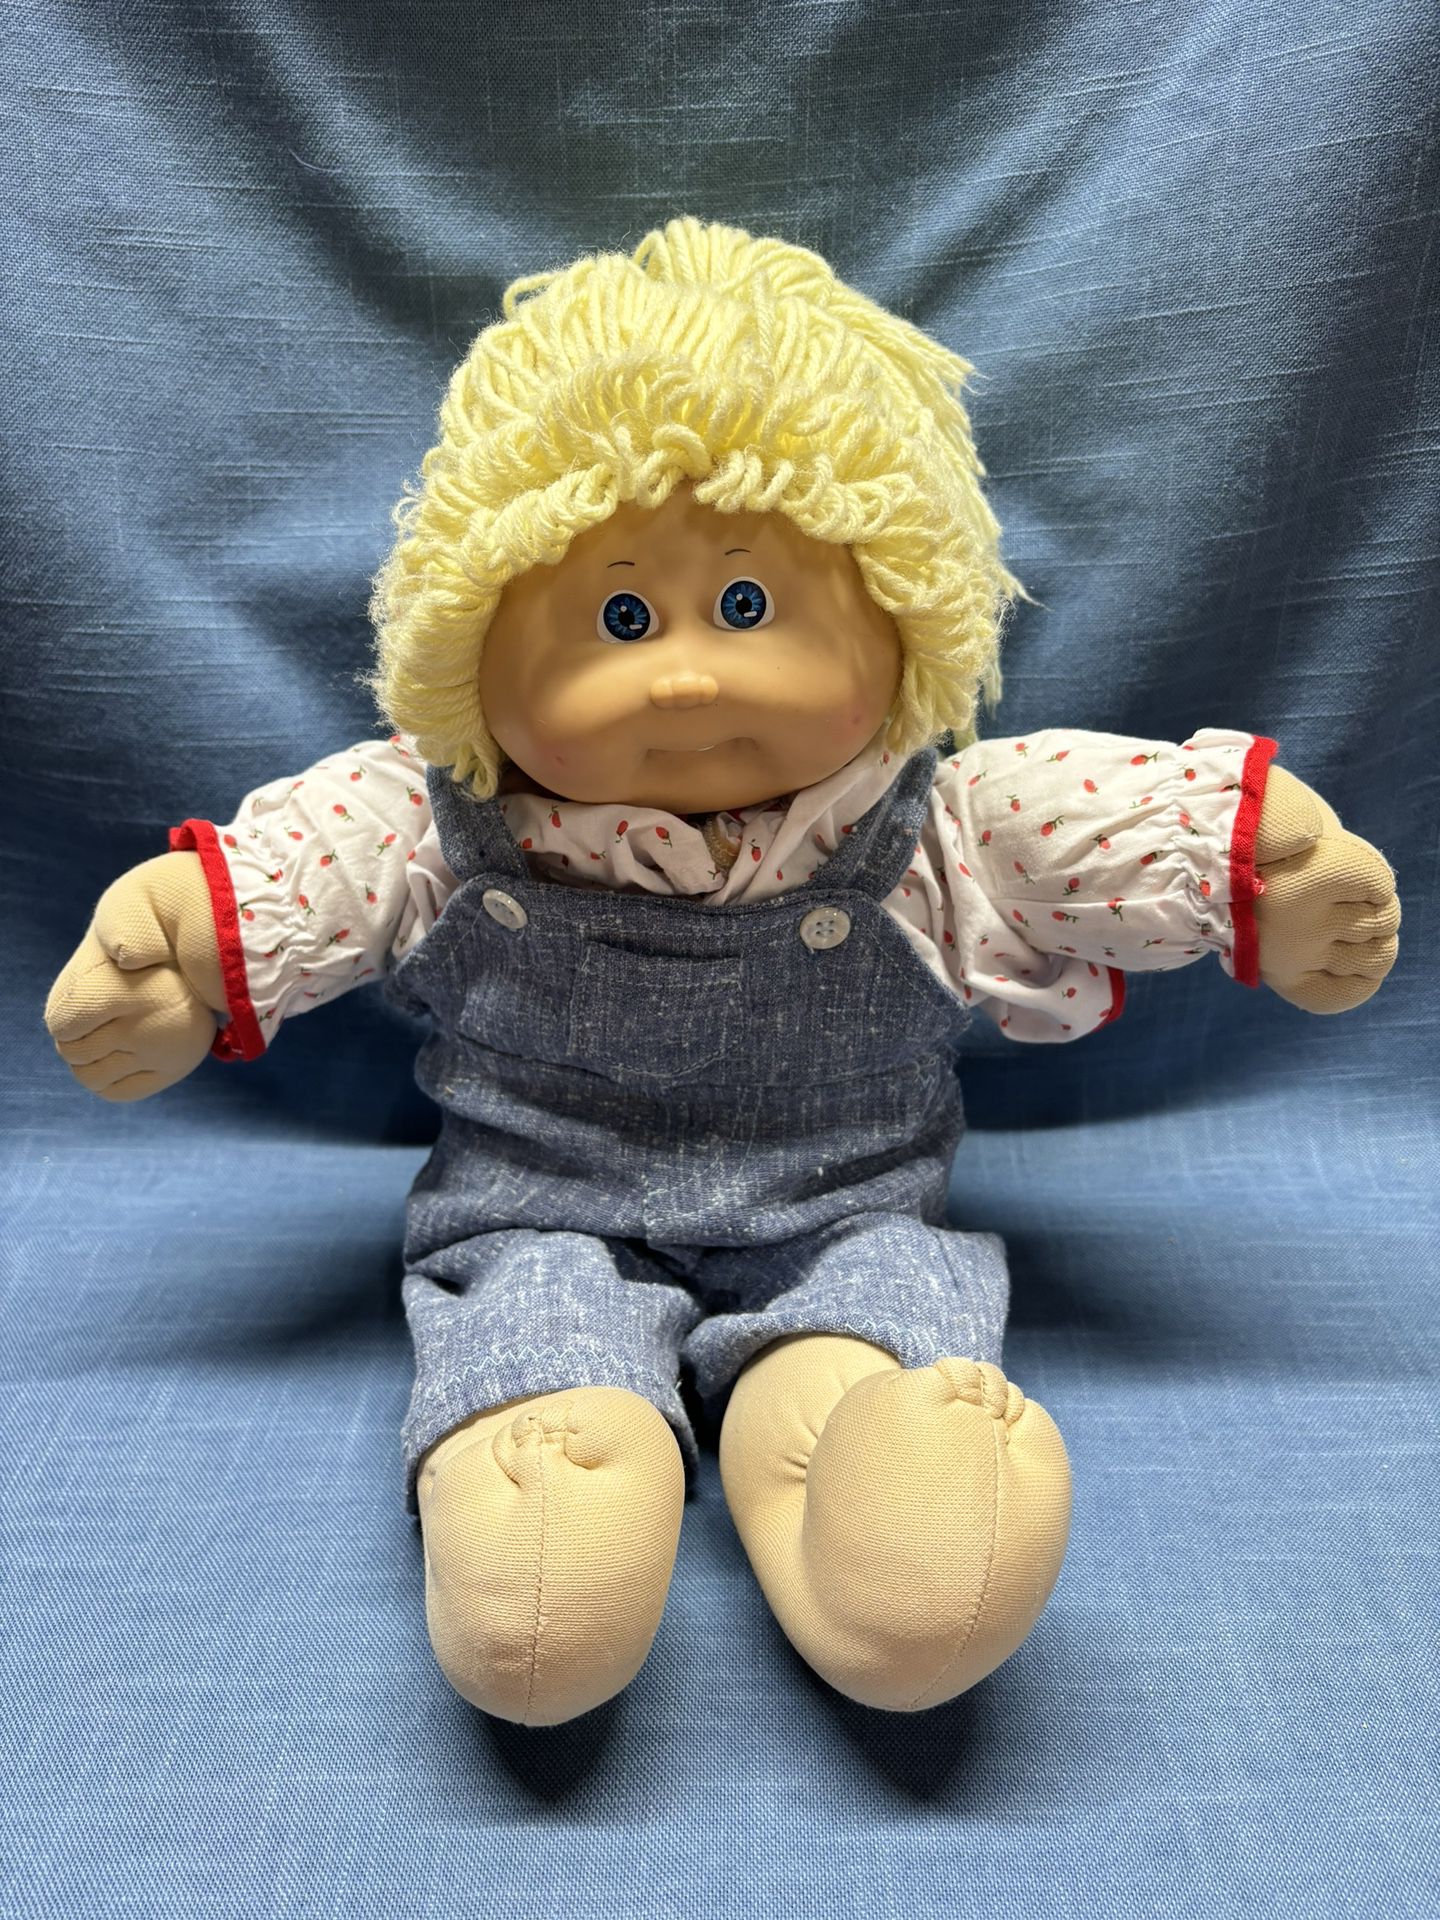 Vintage Cabbage Patch Doll (1978,1982) - Great Condition! 